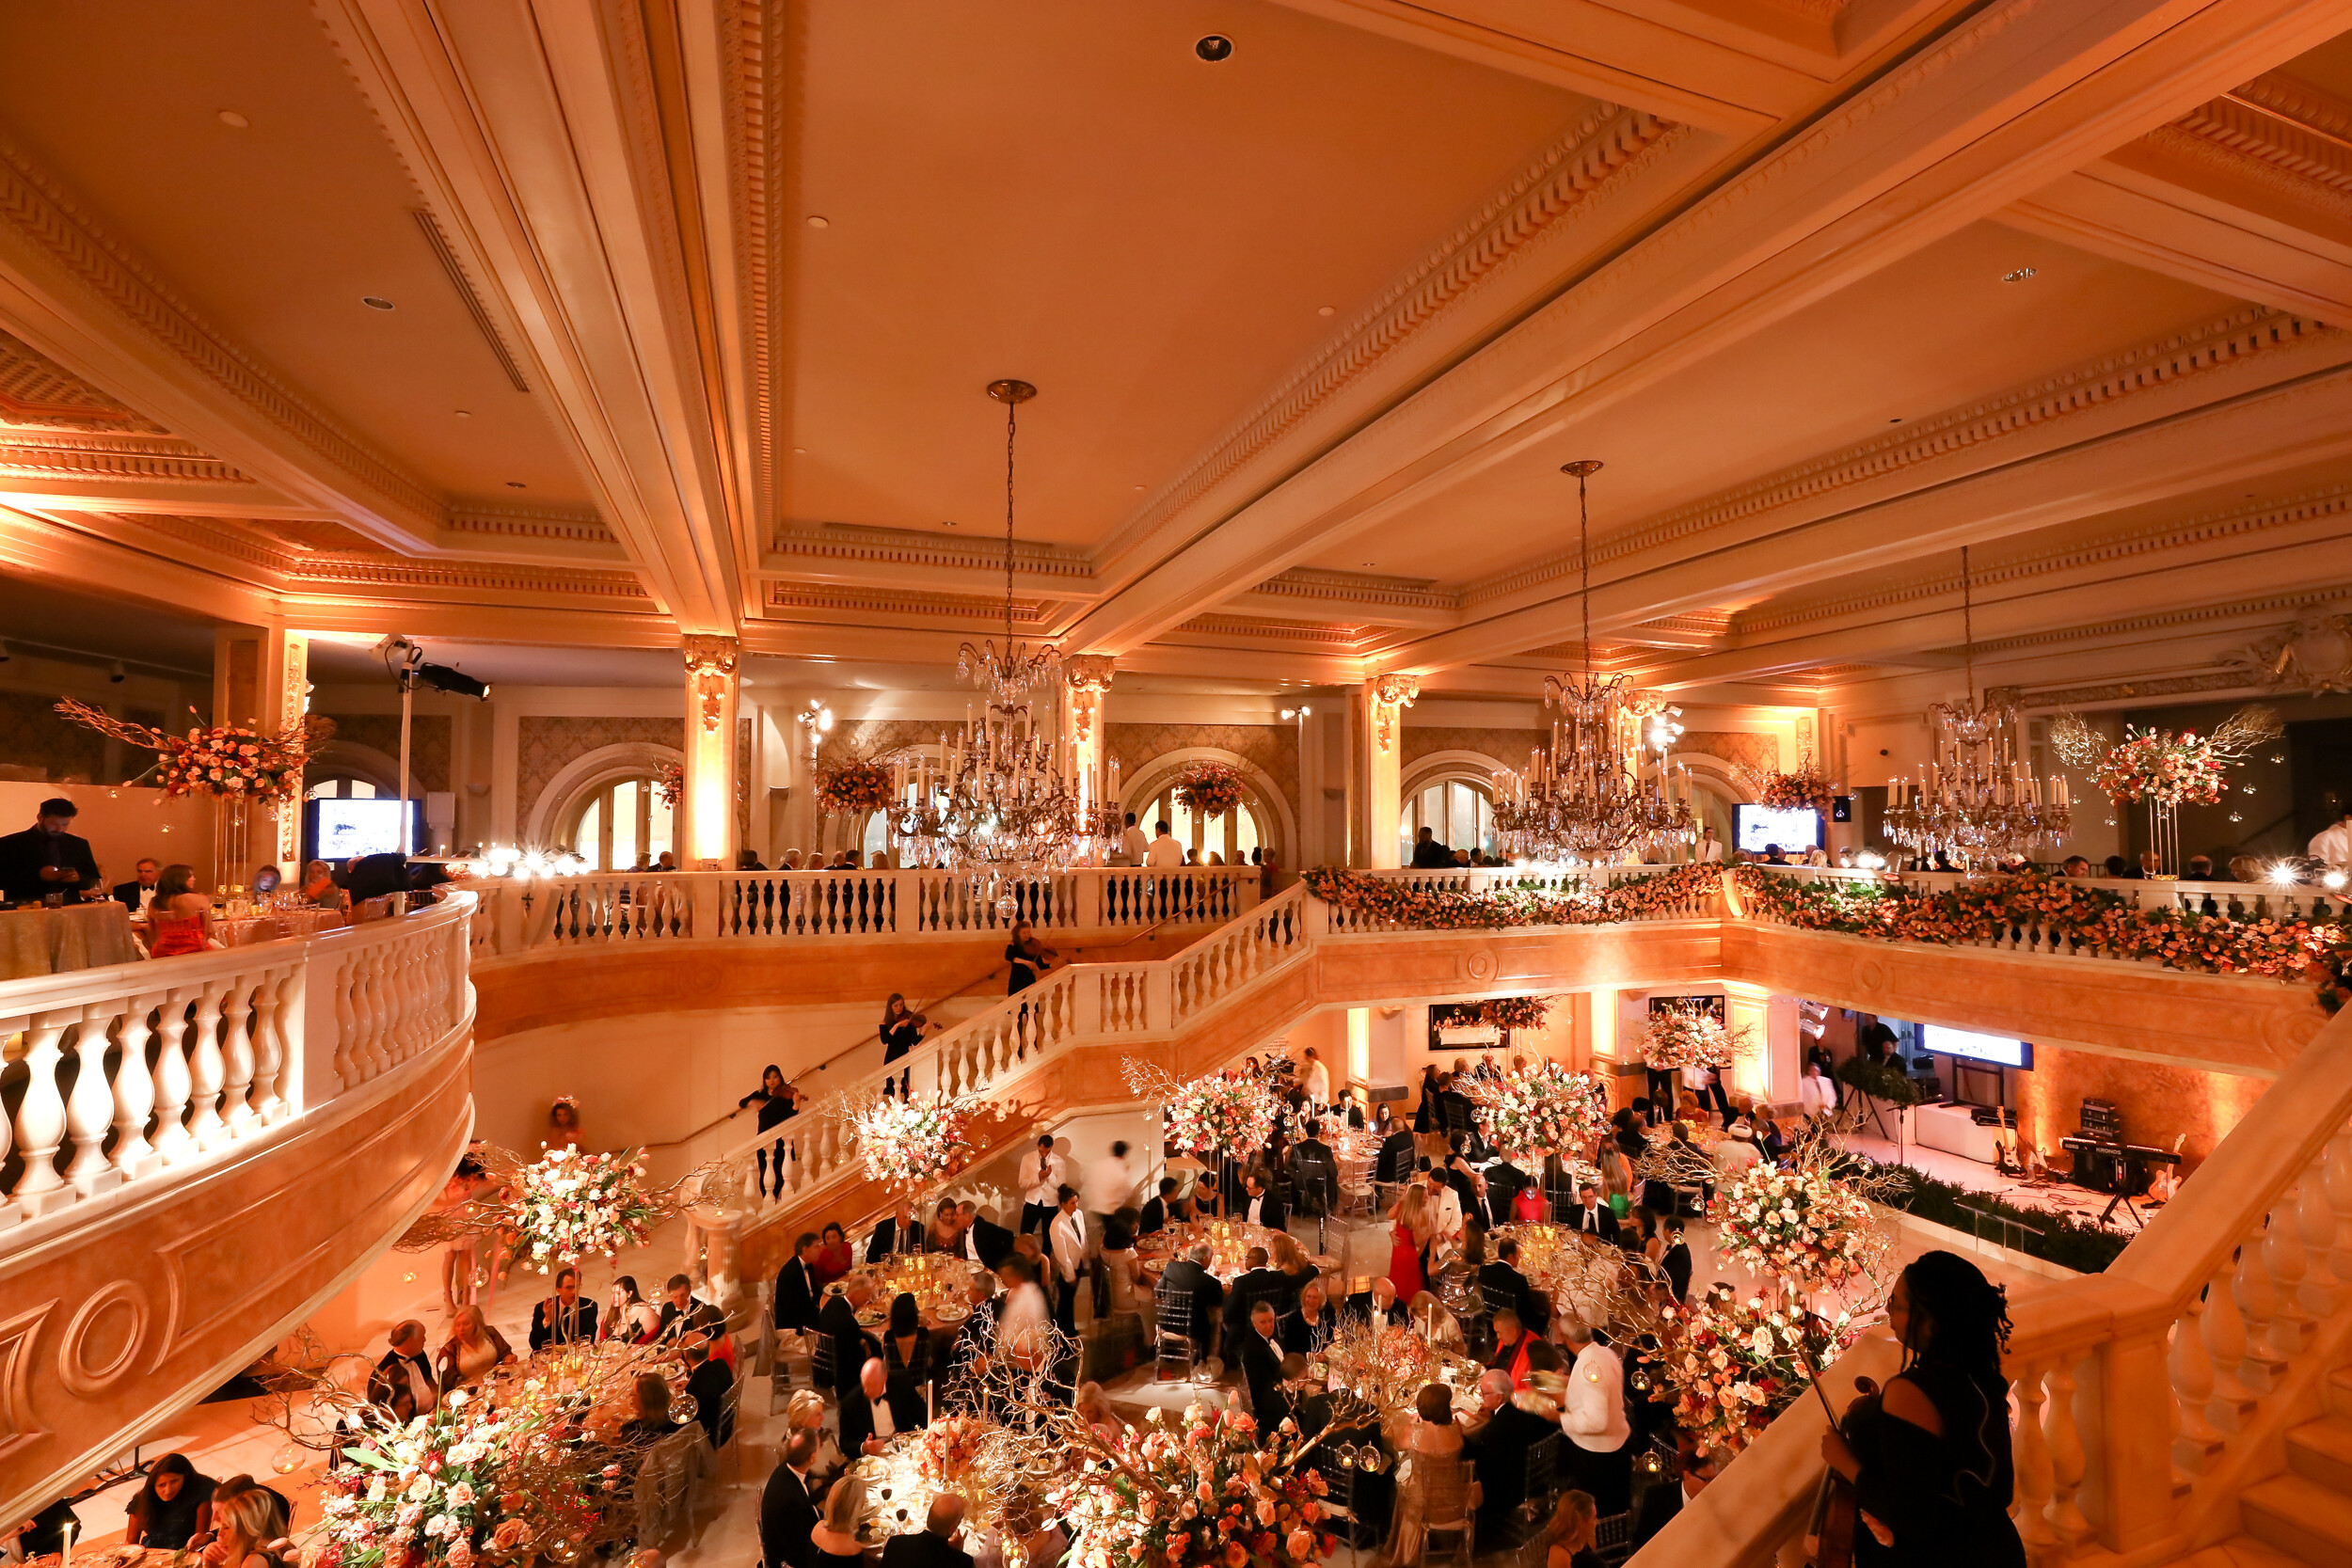 View of the gala from above looking out at the chandeliers, violin players on the marble staircase, and people gathered at round tables surrounded by abundant floral arrangements.